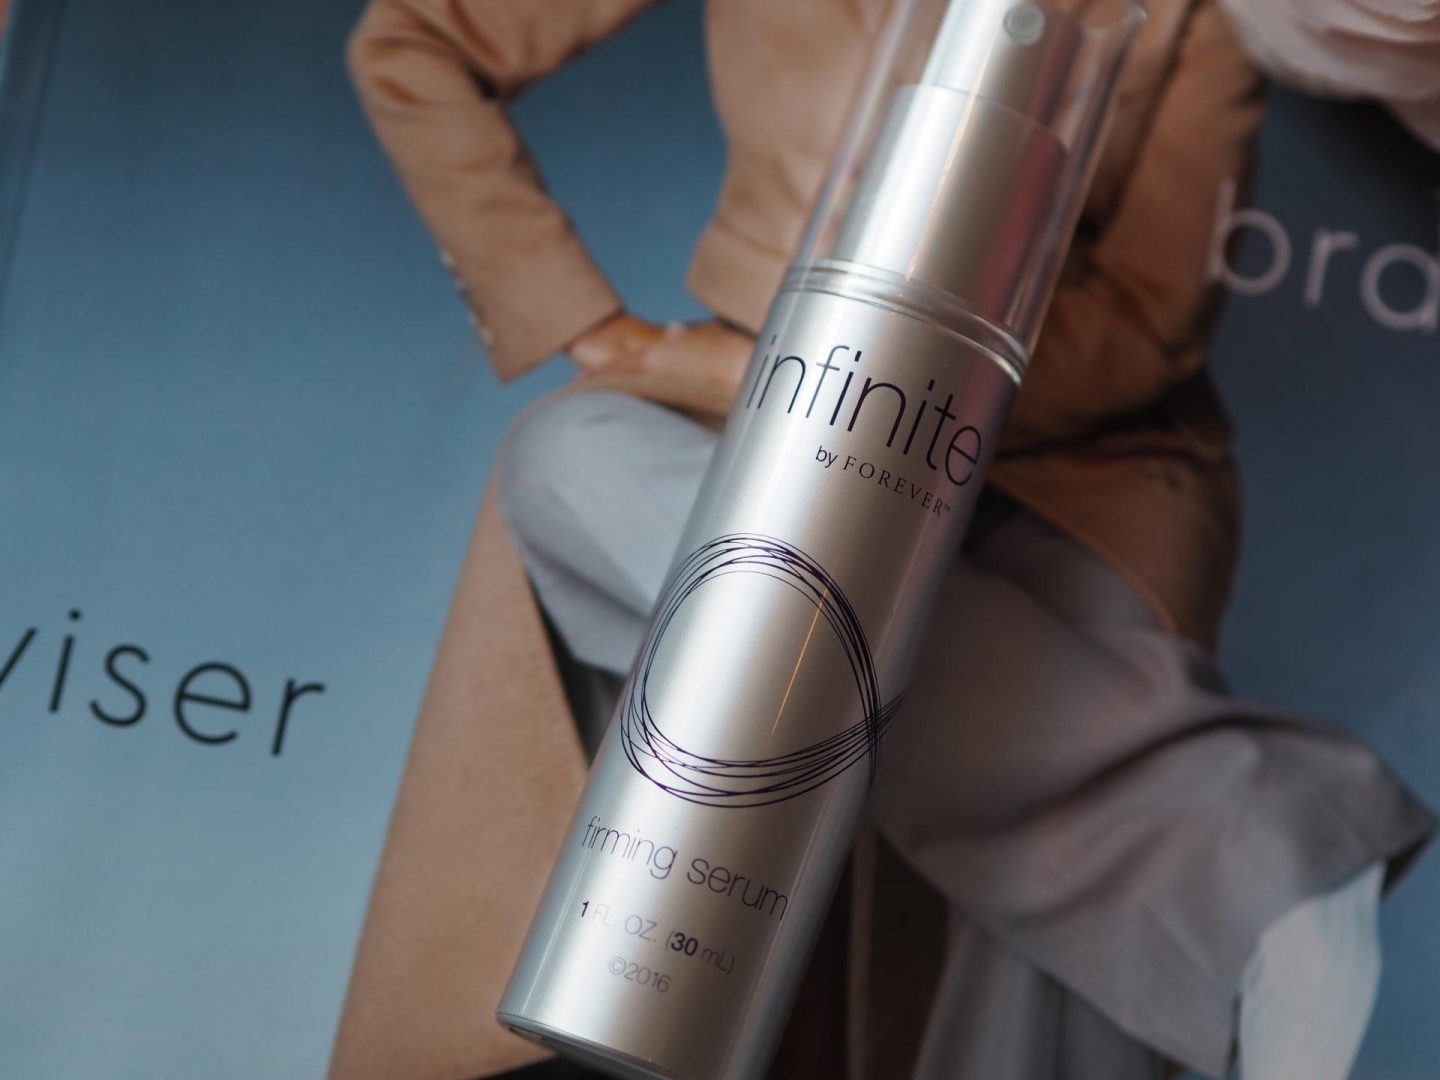 Power Of Aloe - Product: Infinite by Forever Firming Serum